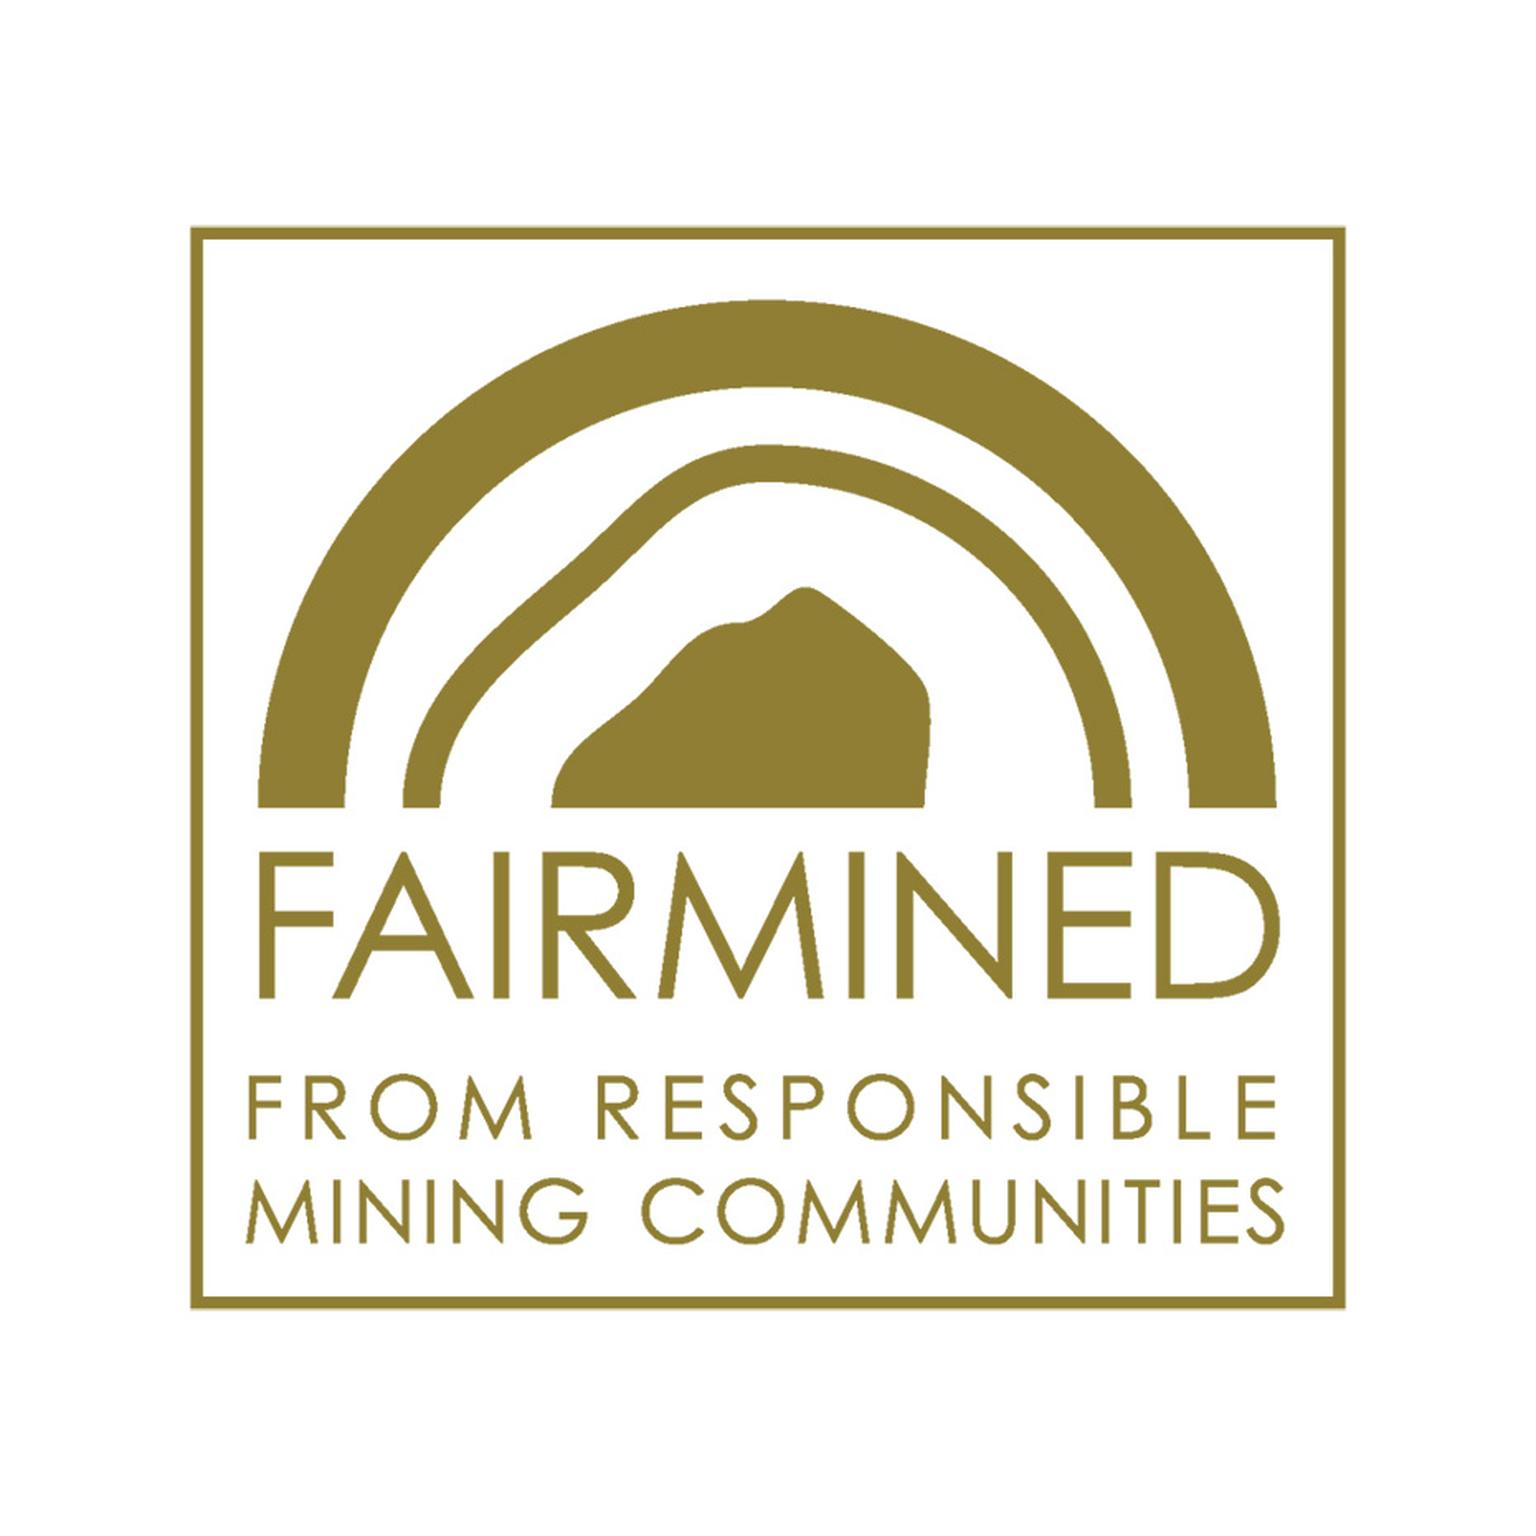 The new Fairmined logo sends a direct message about its core values, celebrating a new horizon in mining by focussing on the positive changes that take place in certified mining communities.